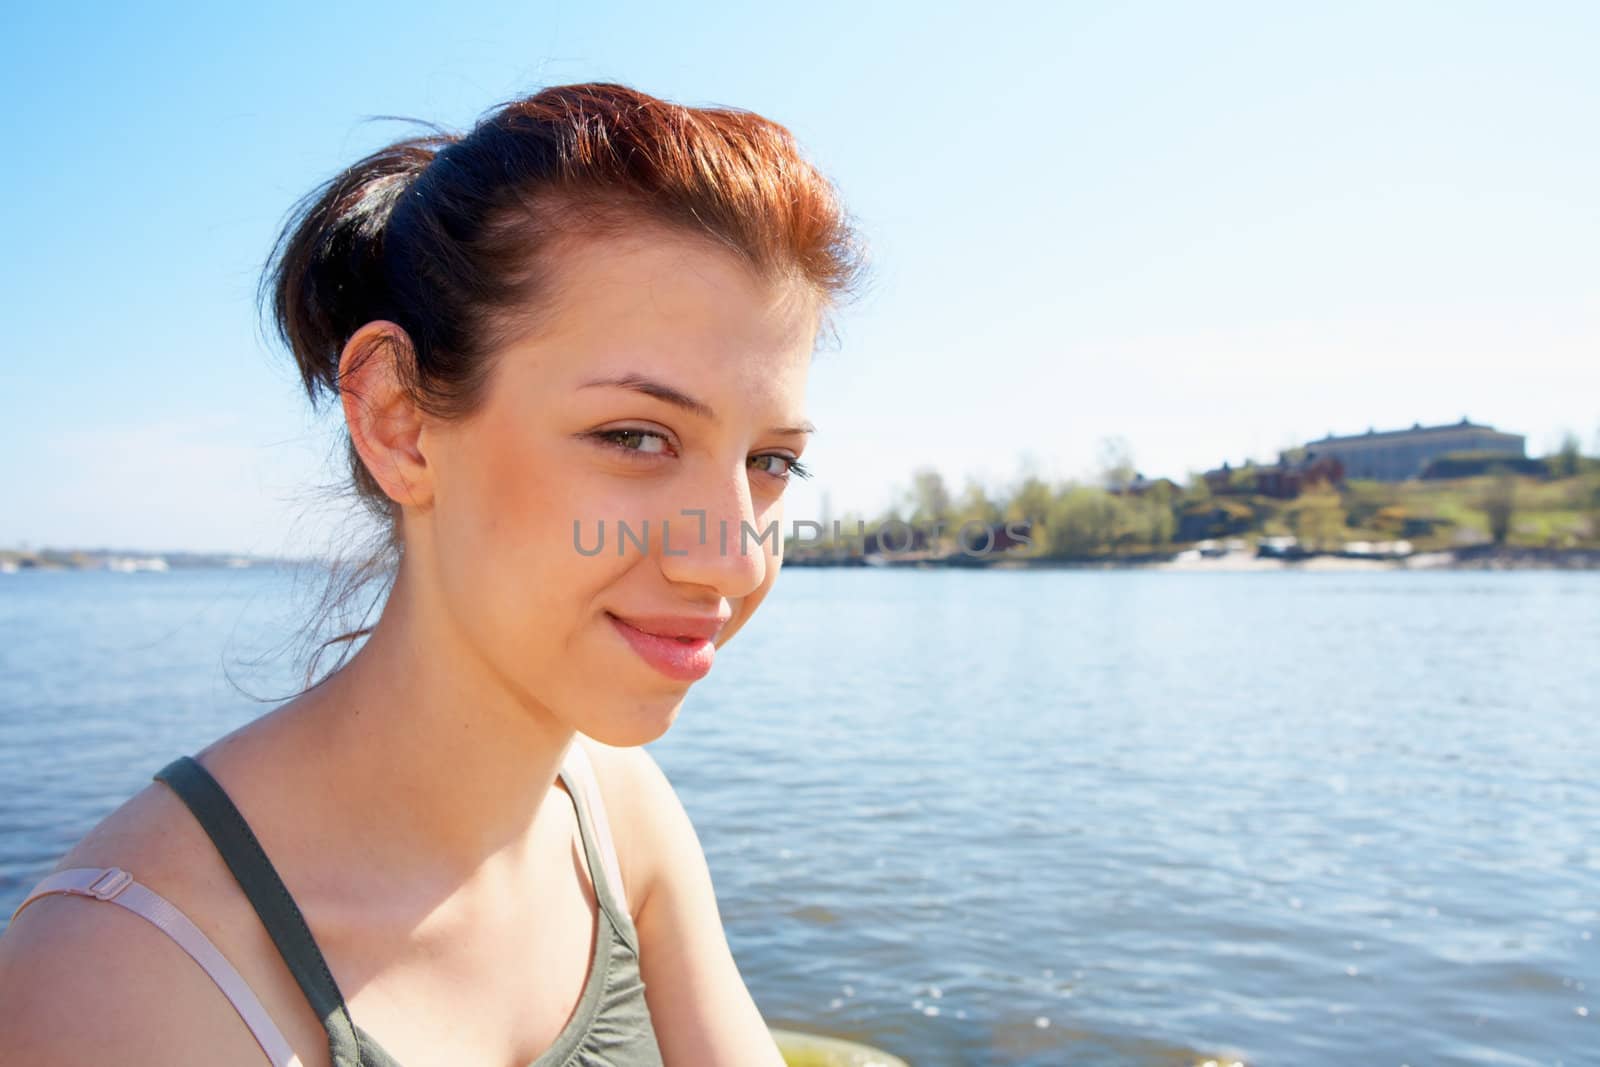 Teenage girl sitting by sea on sunny day looking at camera